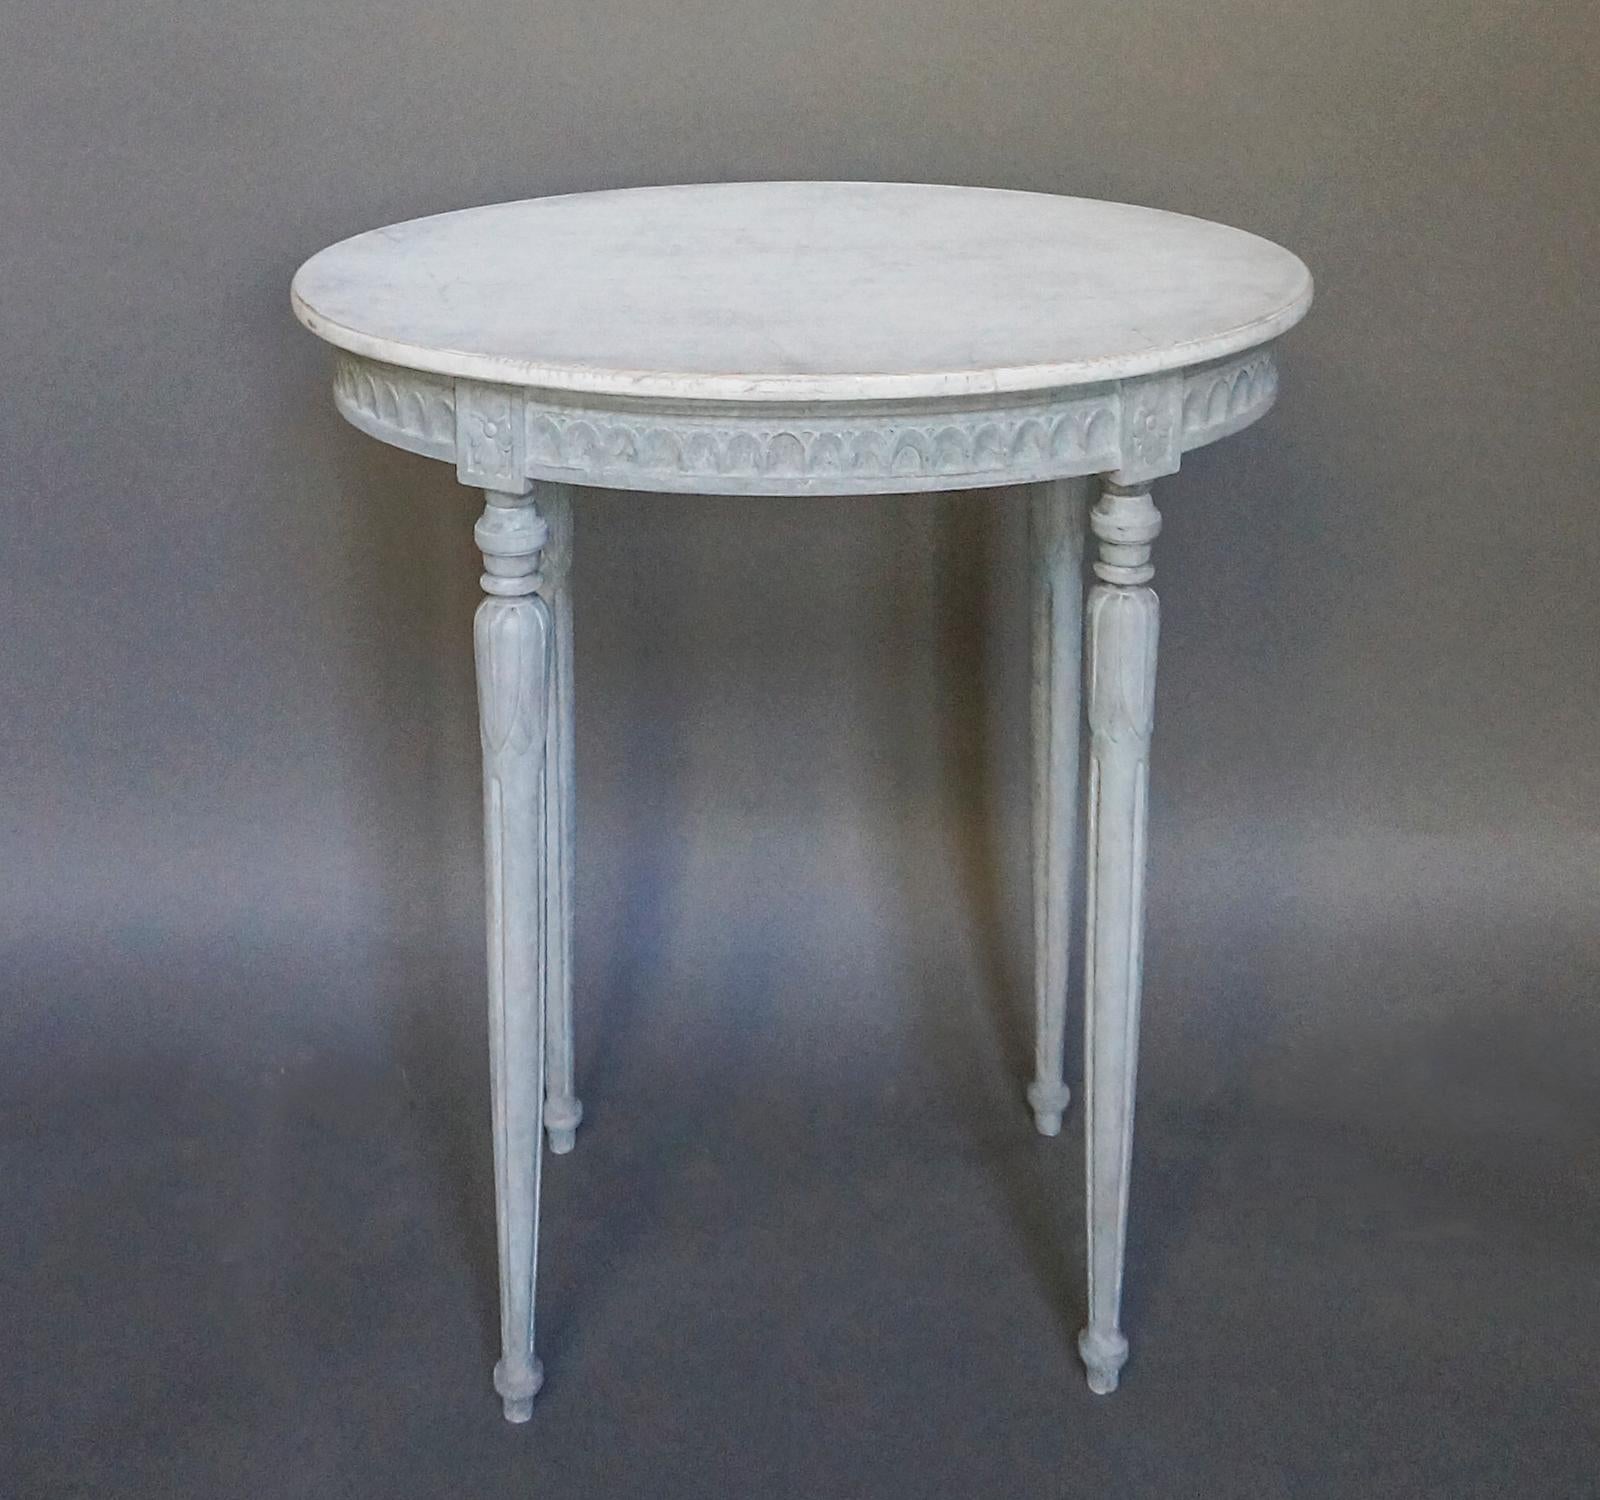 Oval table, Sweden circa 1880, in the Gustavian style. The apron is ringed with lambs-tongue molding between the corner blocks with their carved rosettes. The tapering legs have acanthus leaf detail below a section of delicate turnings. A graceful